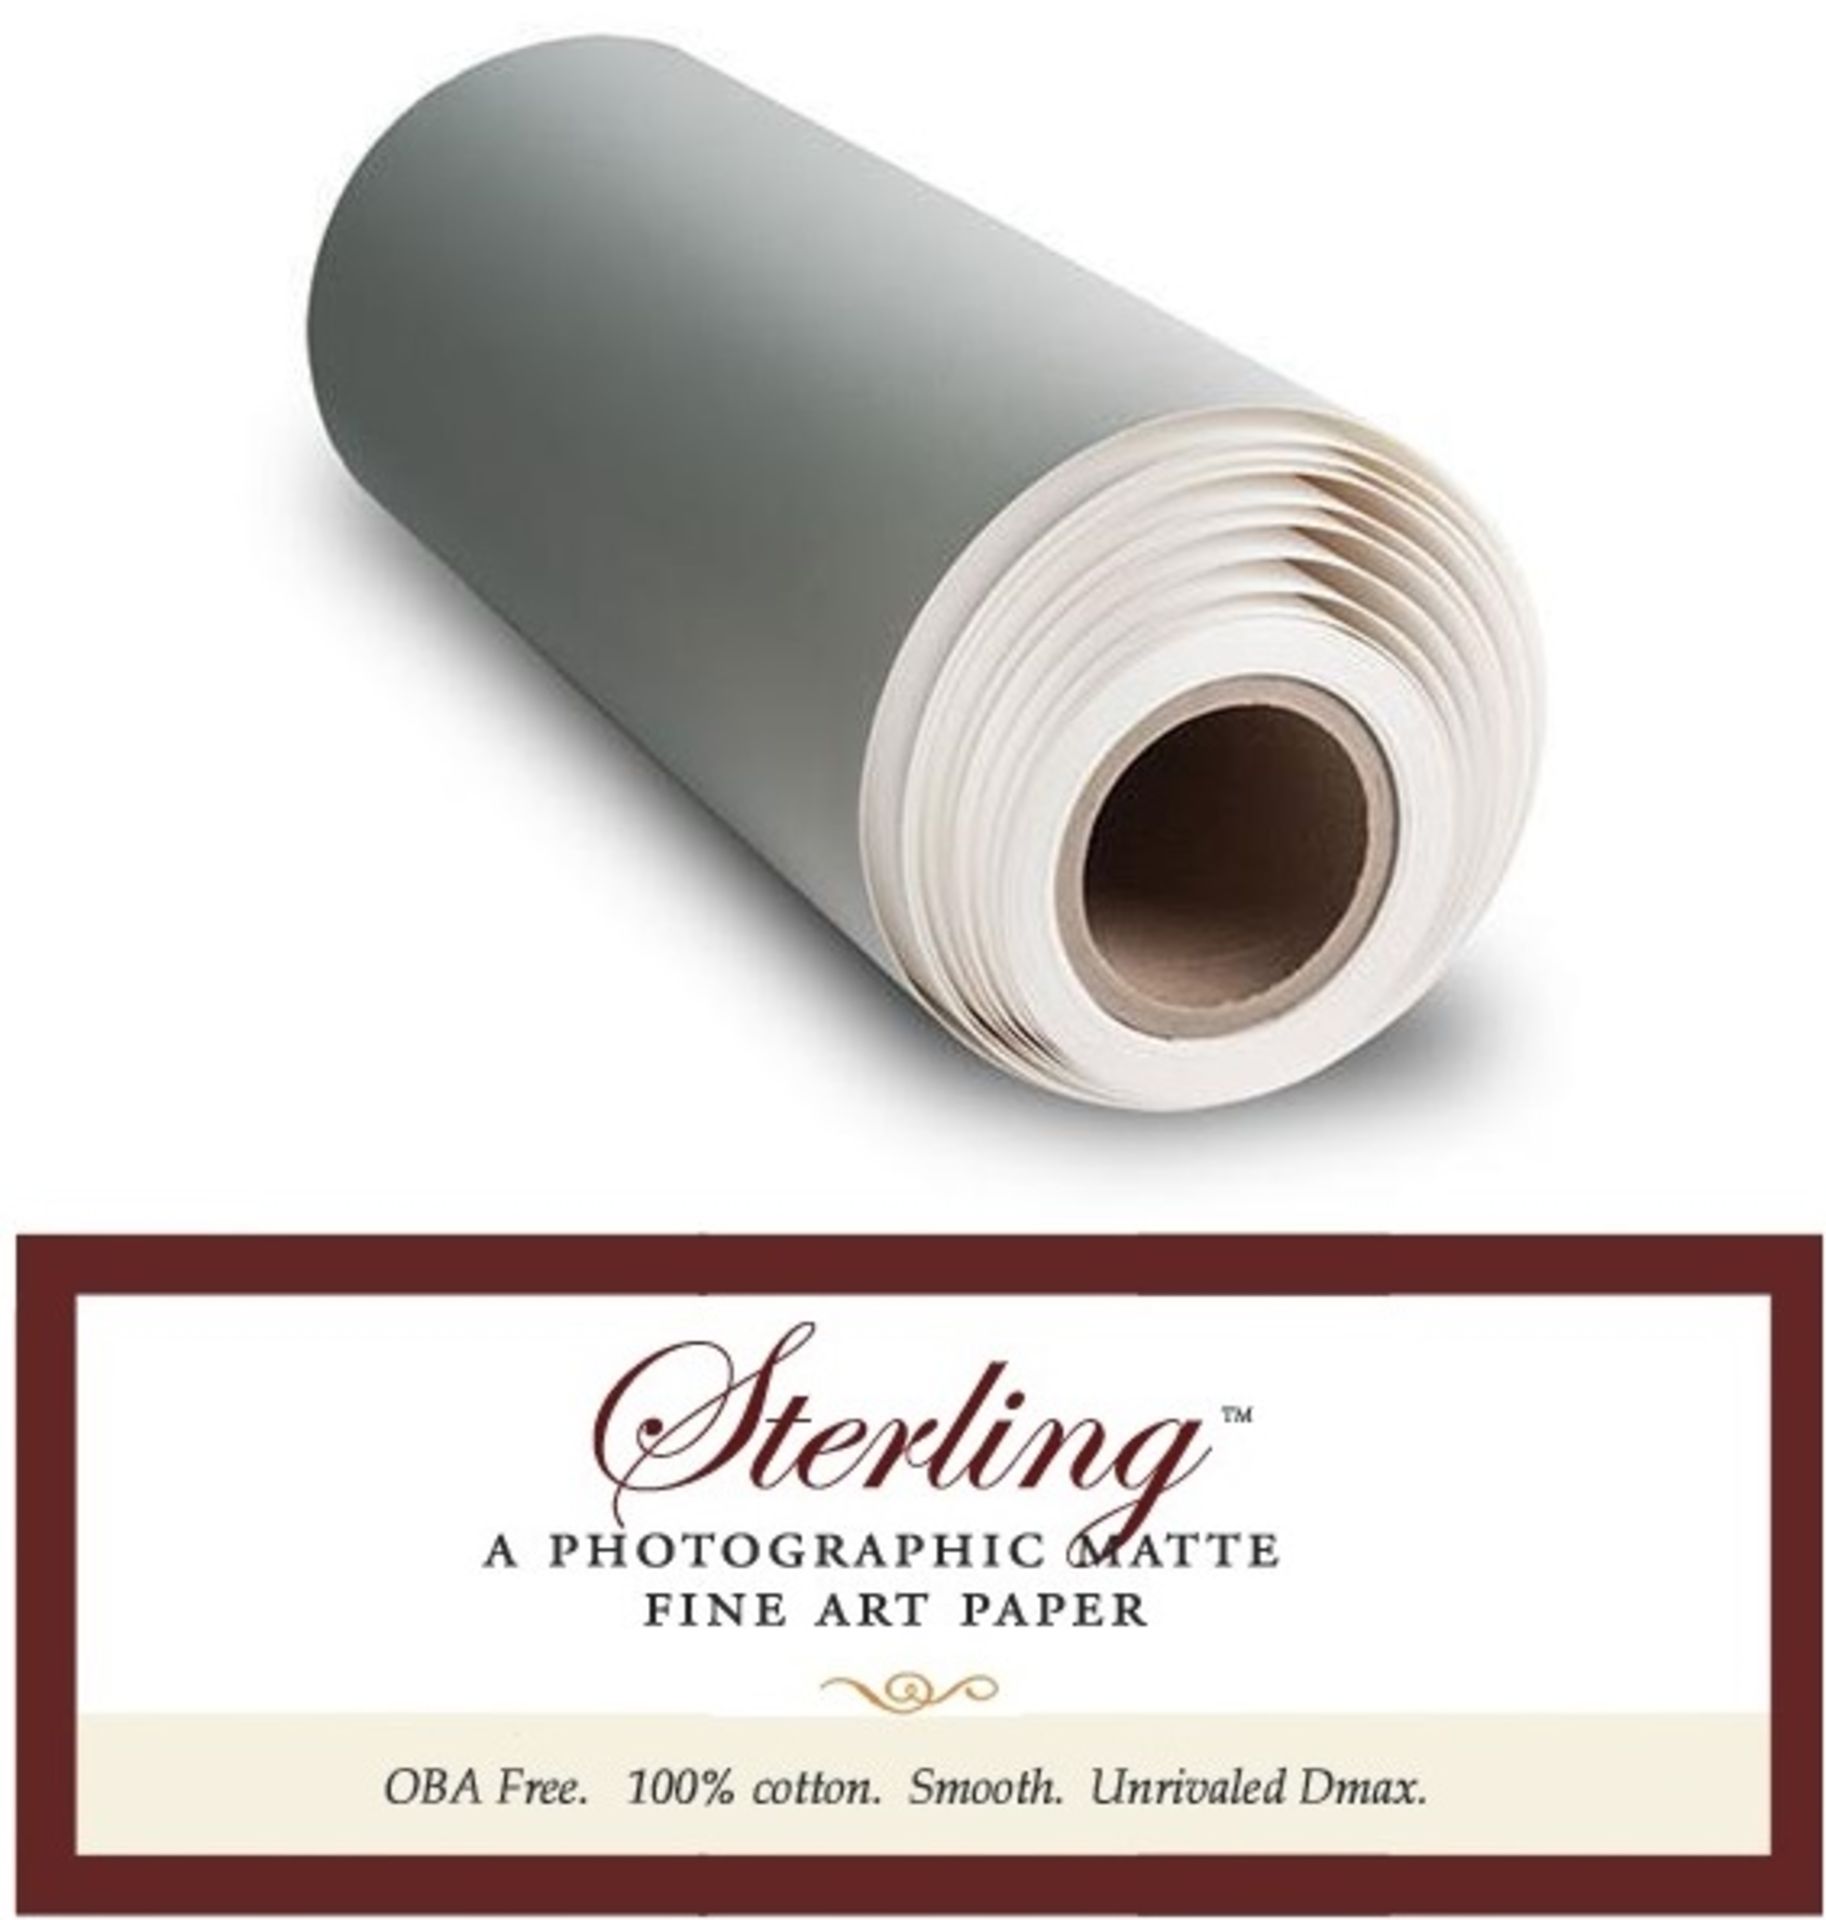 1 x Roll of Breathing Colour STERLING Photographic Matte Fine Art Paper - Size 24" x 50' -